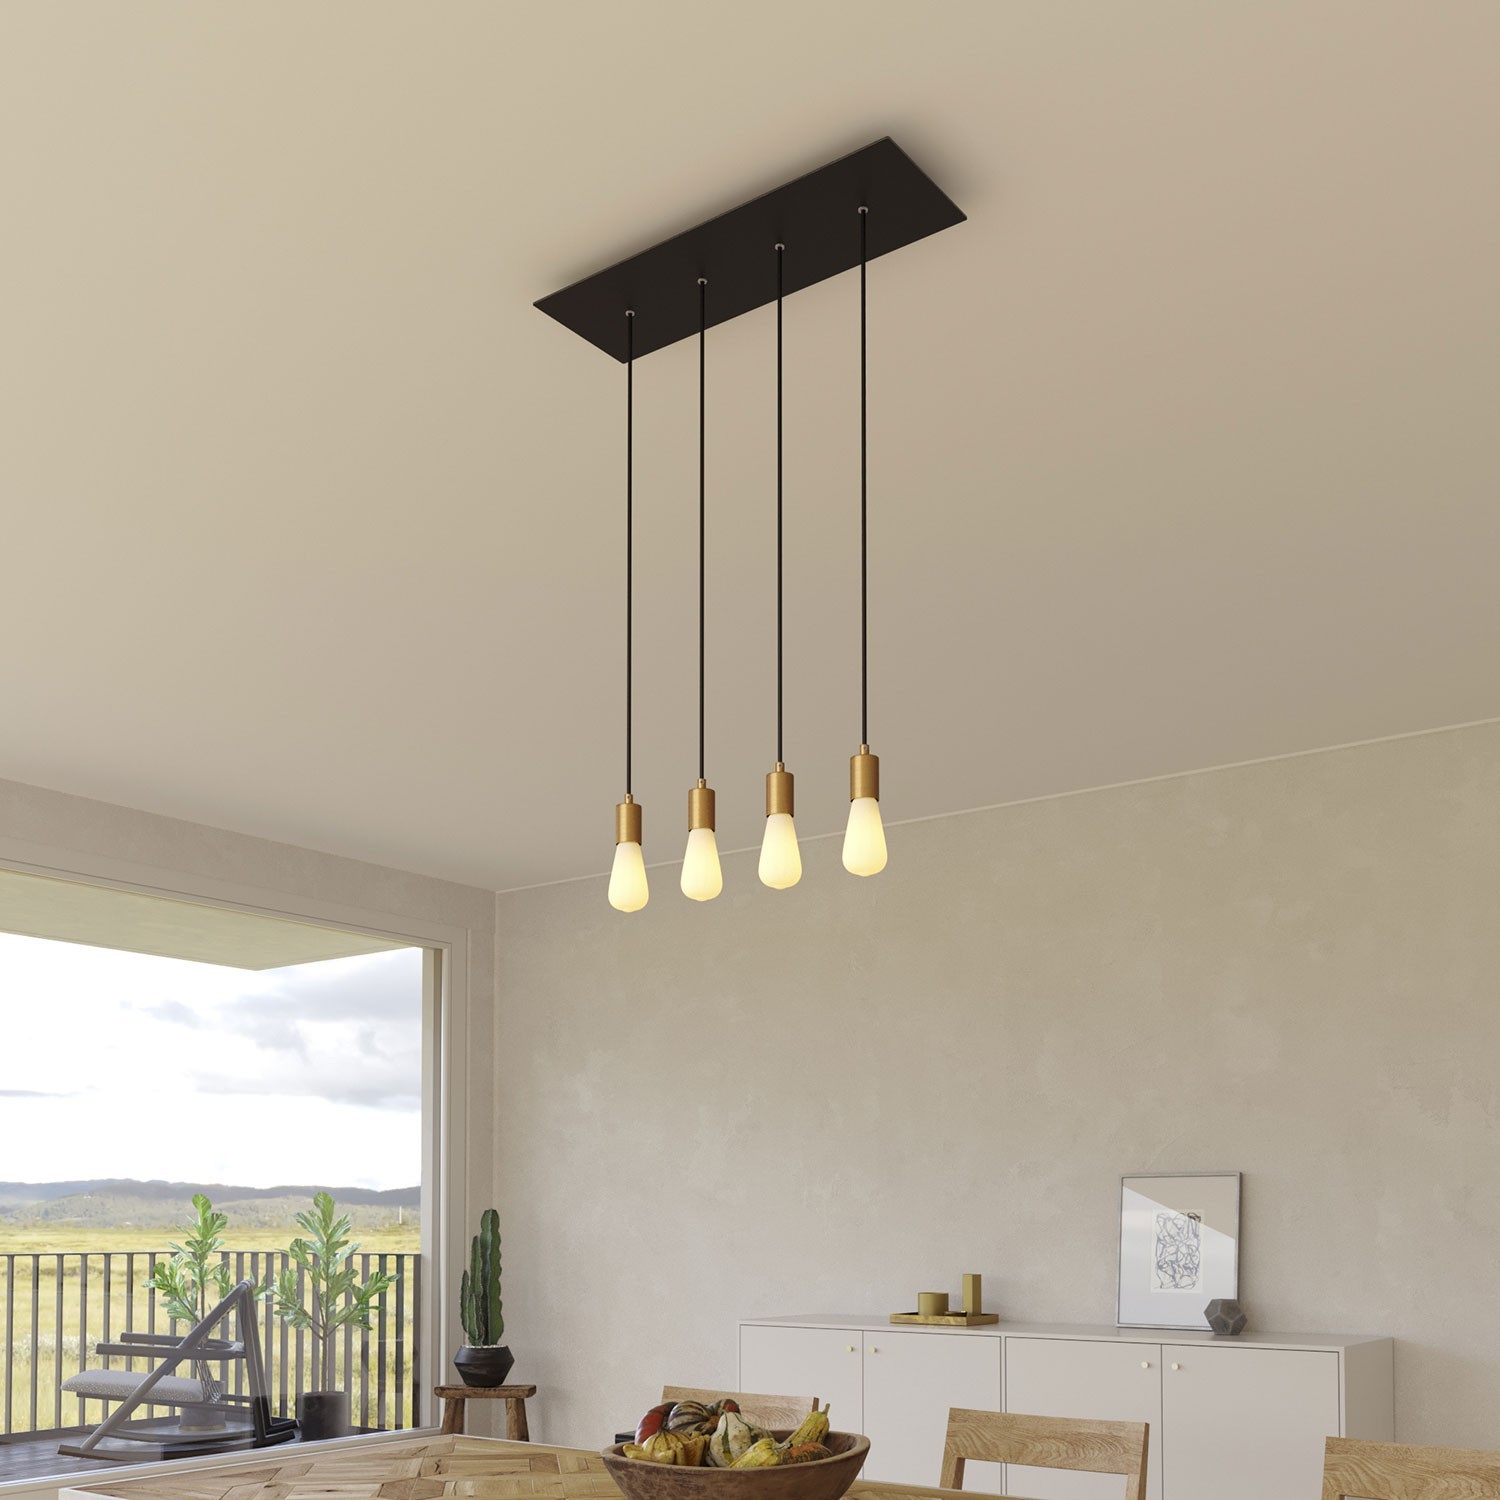 4-light pendant lamp with 675 mm rectangular XXL Rose-One, featuring fabric cable and metal finishes